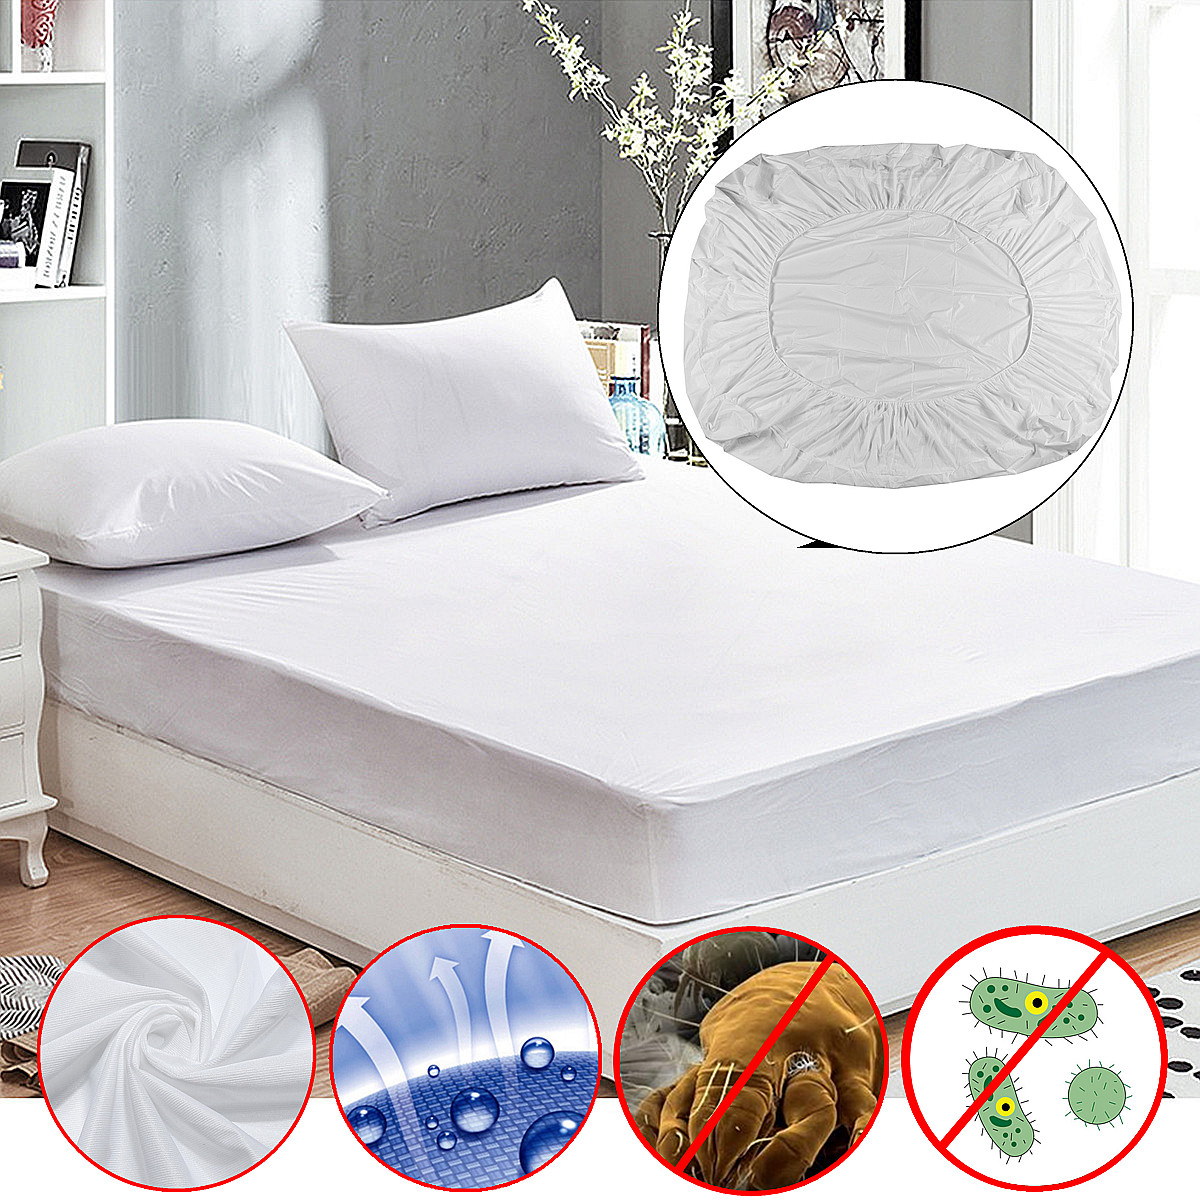 

Anti Dust Mite Mattress Protector Cover Breathable Fitted Bed Sheet Waterproof Furniture Waterproof Cover